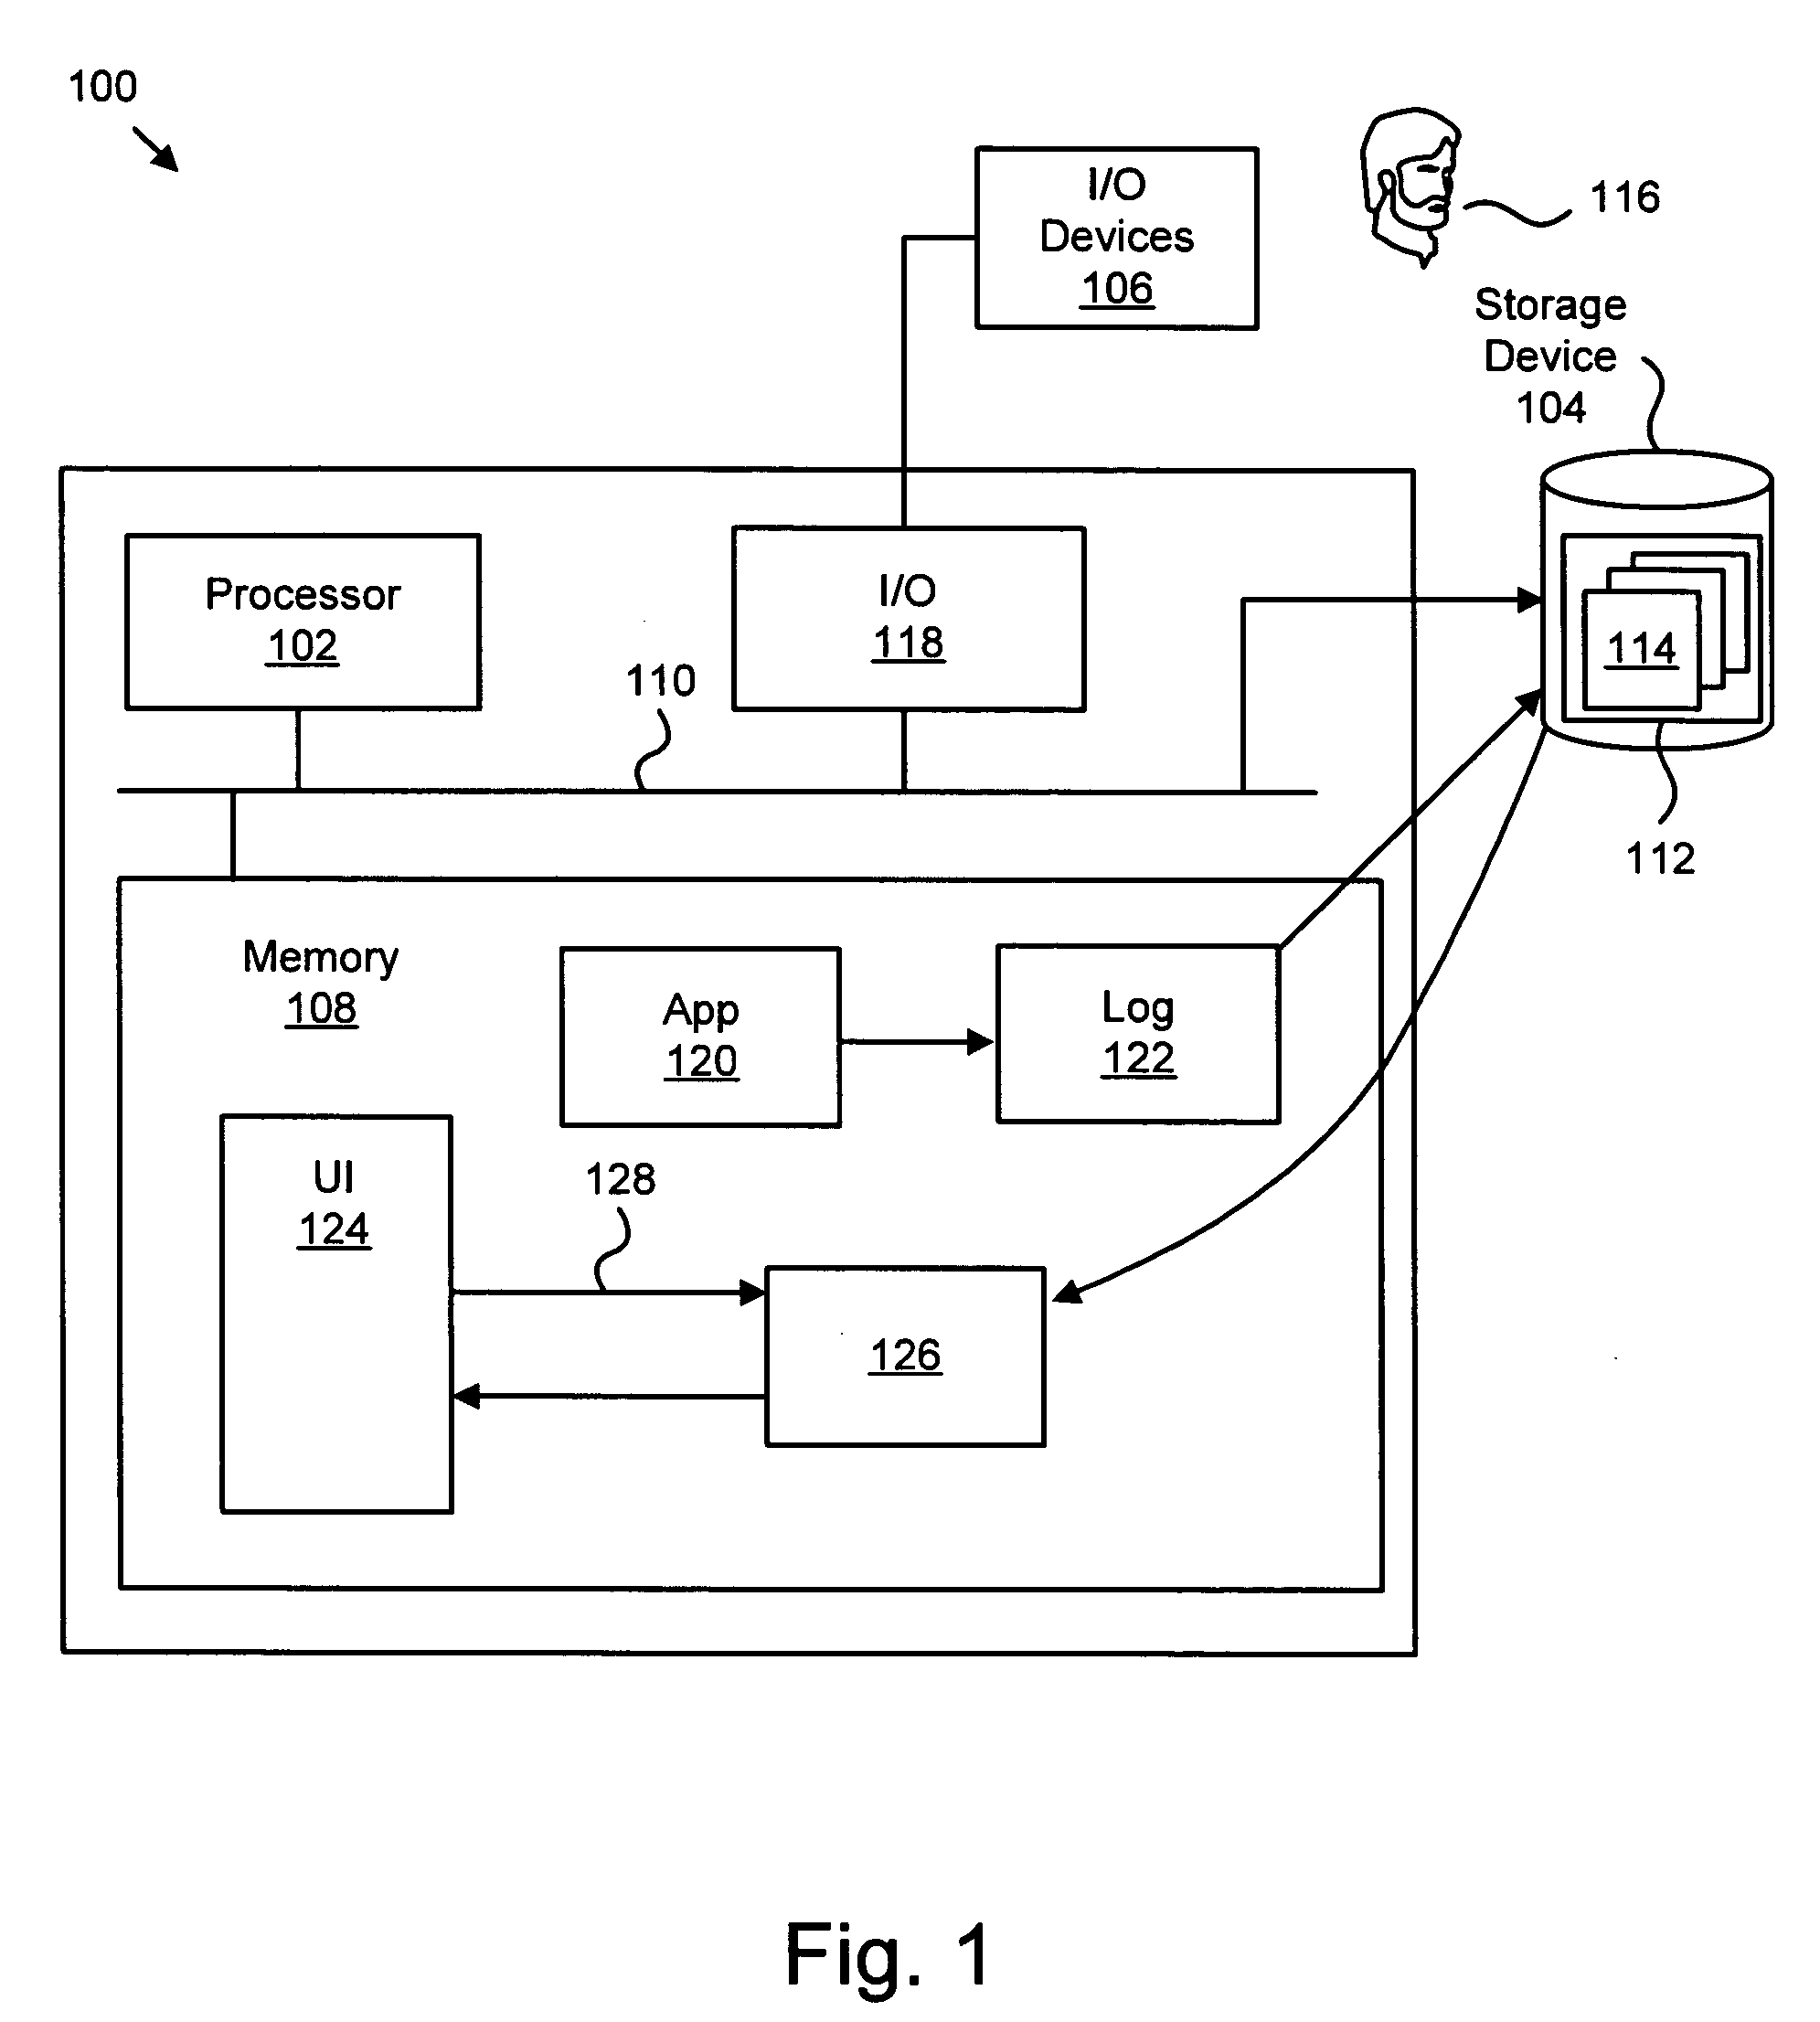 Method for condensing reported checkpoint log data